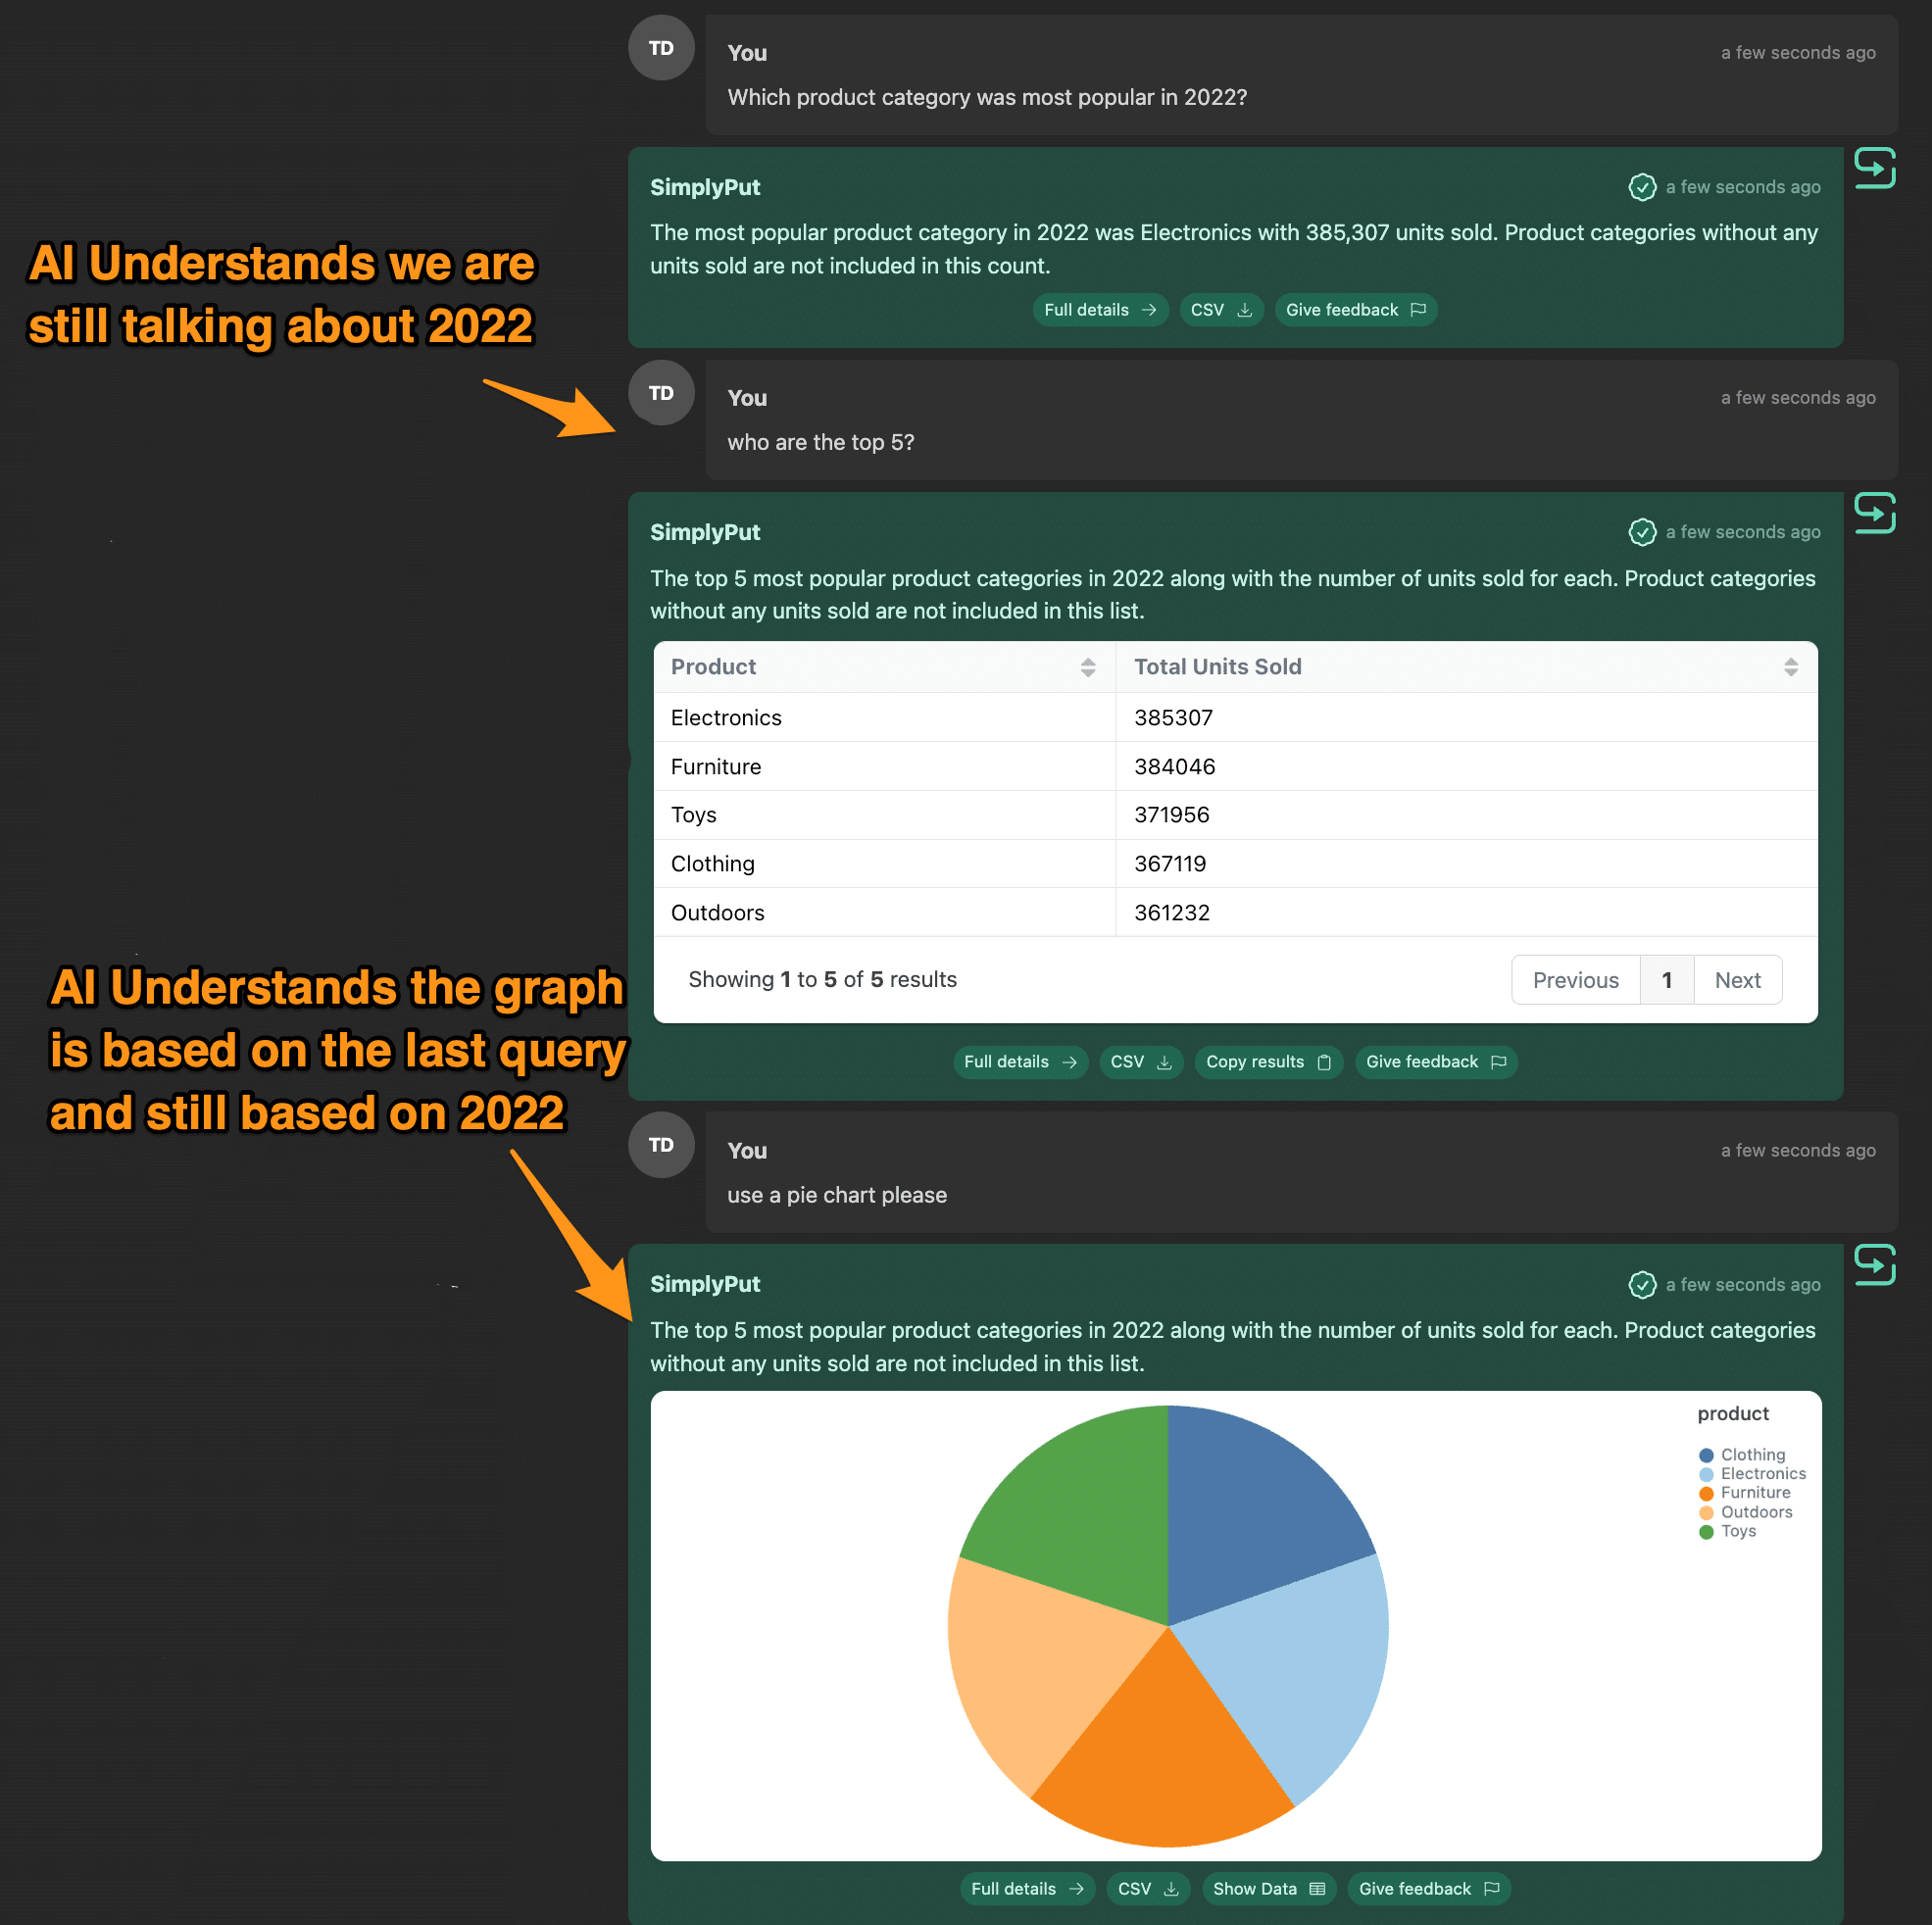 Screenshot of a chat-based data analysis interface with a conversation about product sales in 2022. The user asks 'Which product category was most popular in 2022?' and the AI responds with 'Electronics' along with a total unit count. The user follows up by asking for the top 5 categories, to which the AI provides a list with 'Electronics' leading. Lastly, the user requests a pie chart, and the AI presents a colorful pie chart representing the top 5 product categories with corresponding legend.